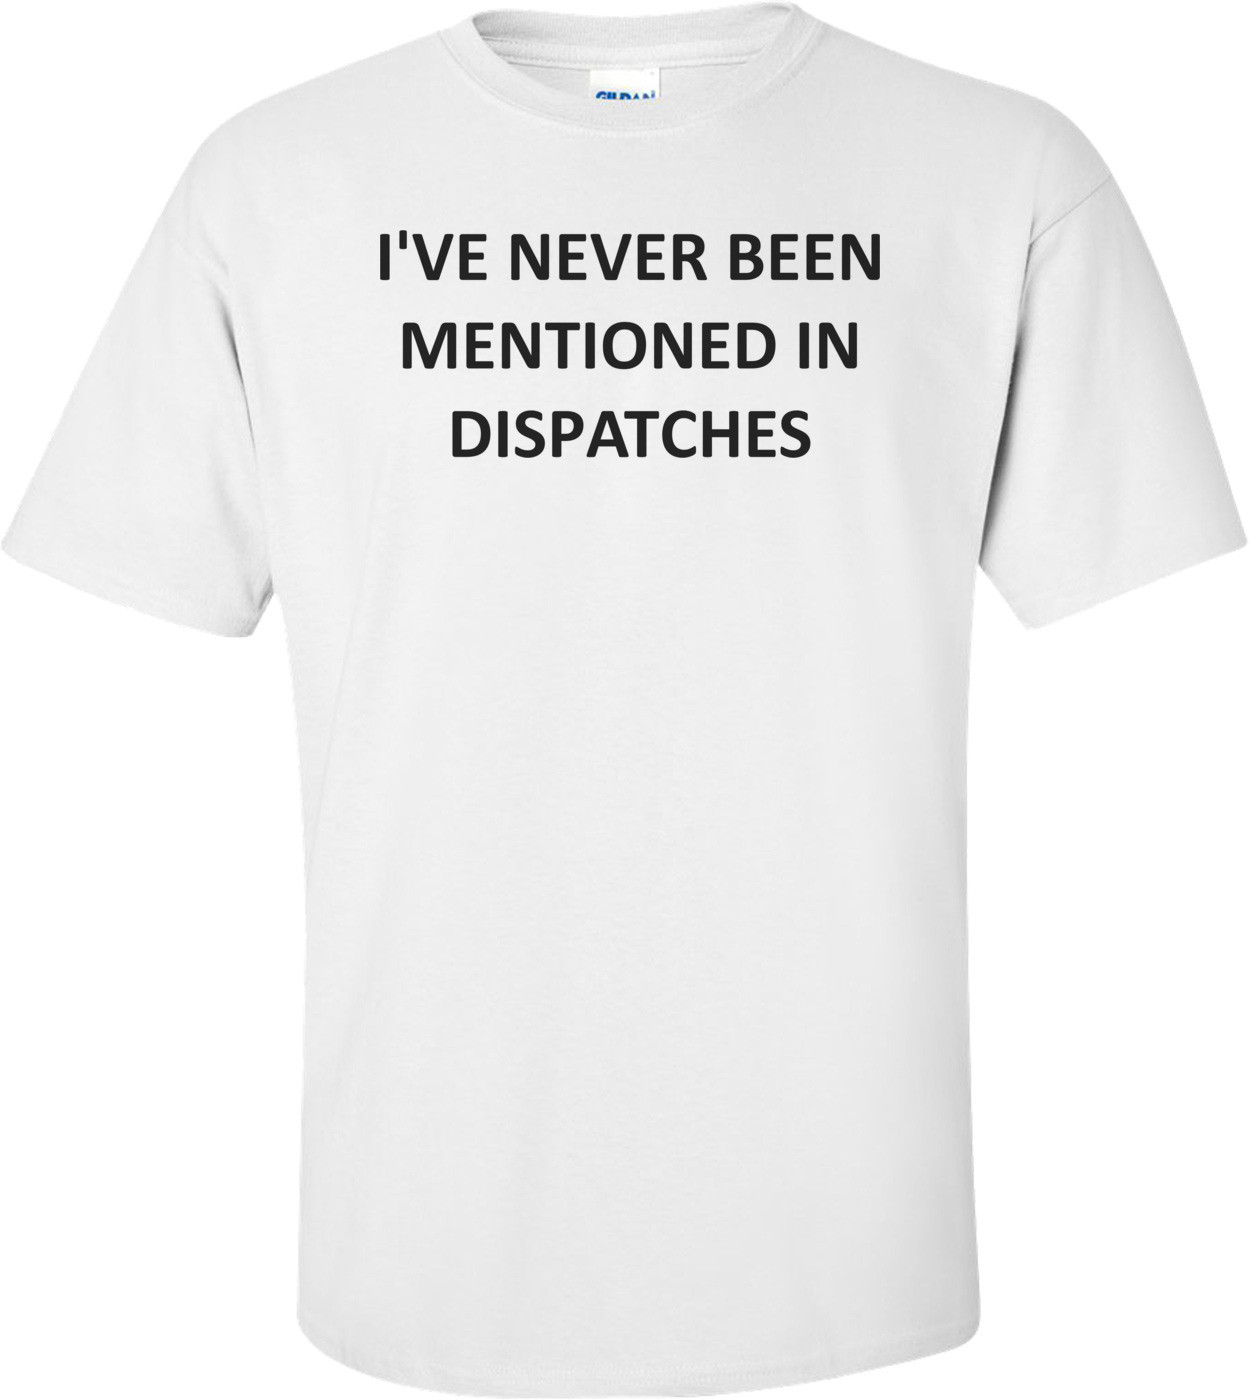 I'VE NEVER BEEN MENTIONED IN DISPATCHES